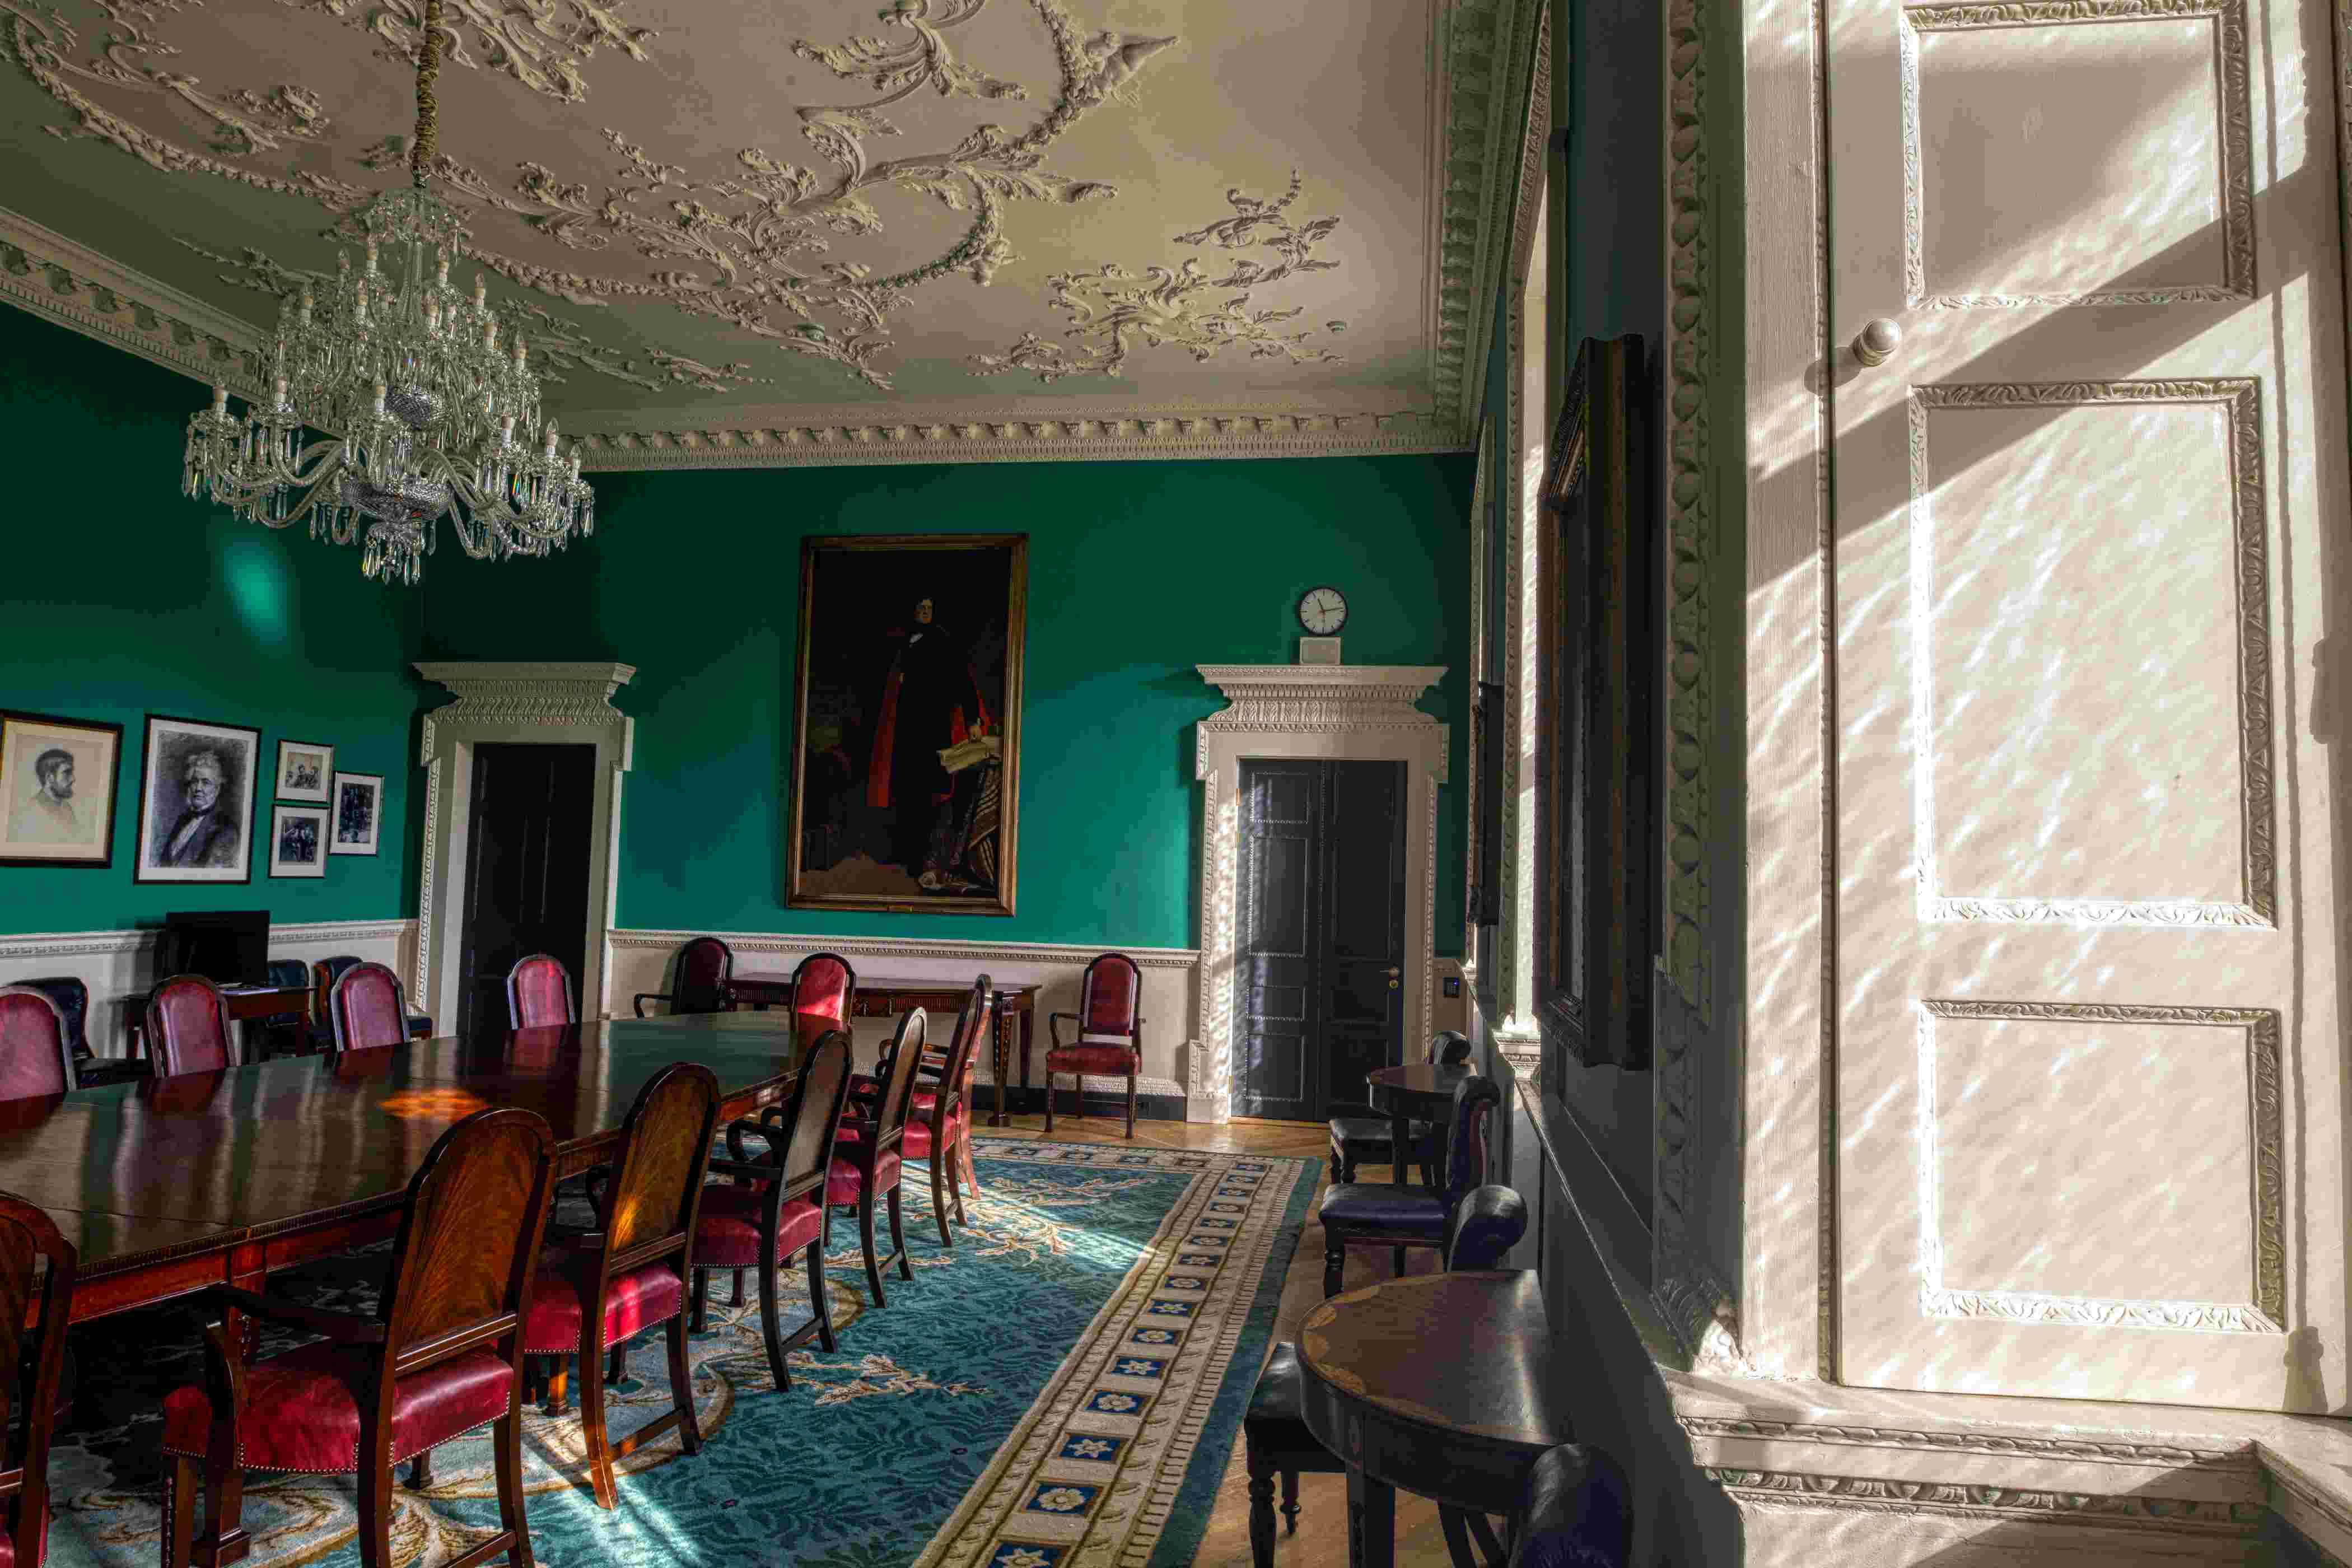 Interior of a room in Leinster House with sun shining in through a window. The room is furnished with a long table and chairs.